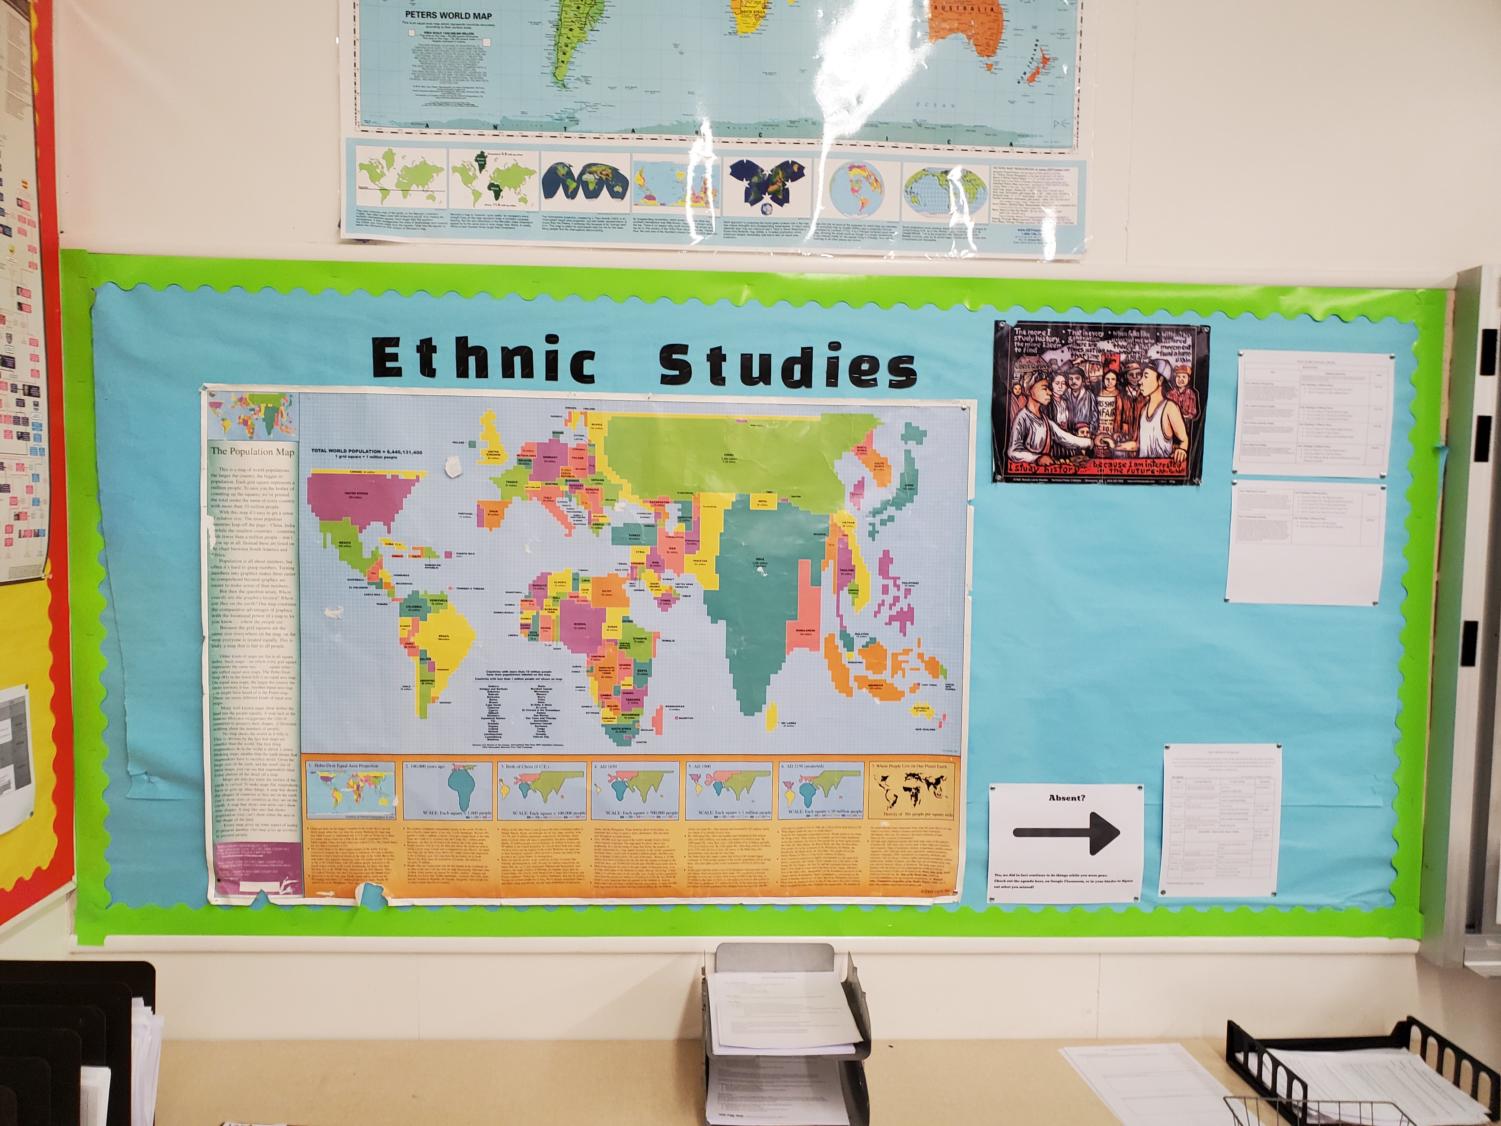 Prior to Ethnic Studies, a similar Psychology poster was hung here. The Psychology Class spent some of their downtime in the class helping Peters deconstruct the Psych poster and replace it with this Ethnic Studies one. 